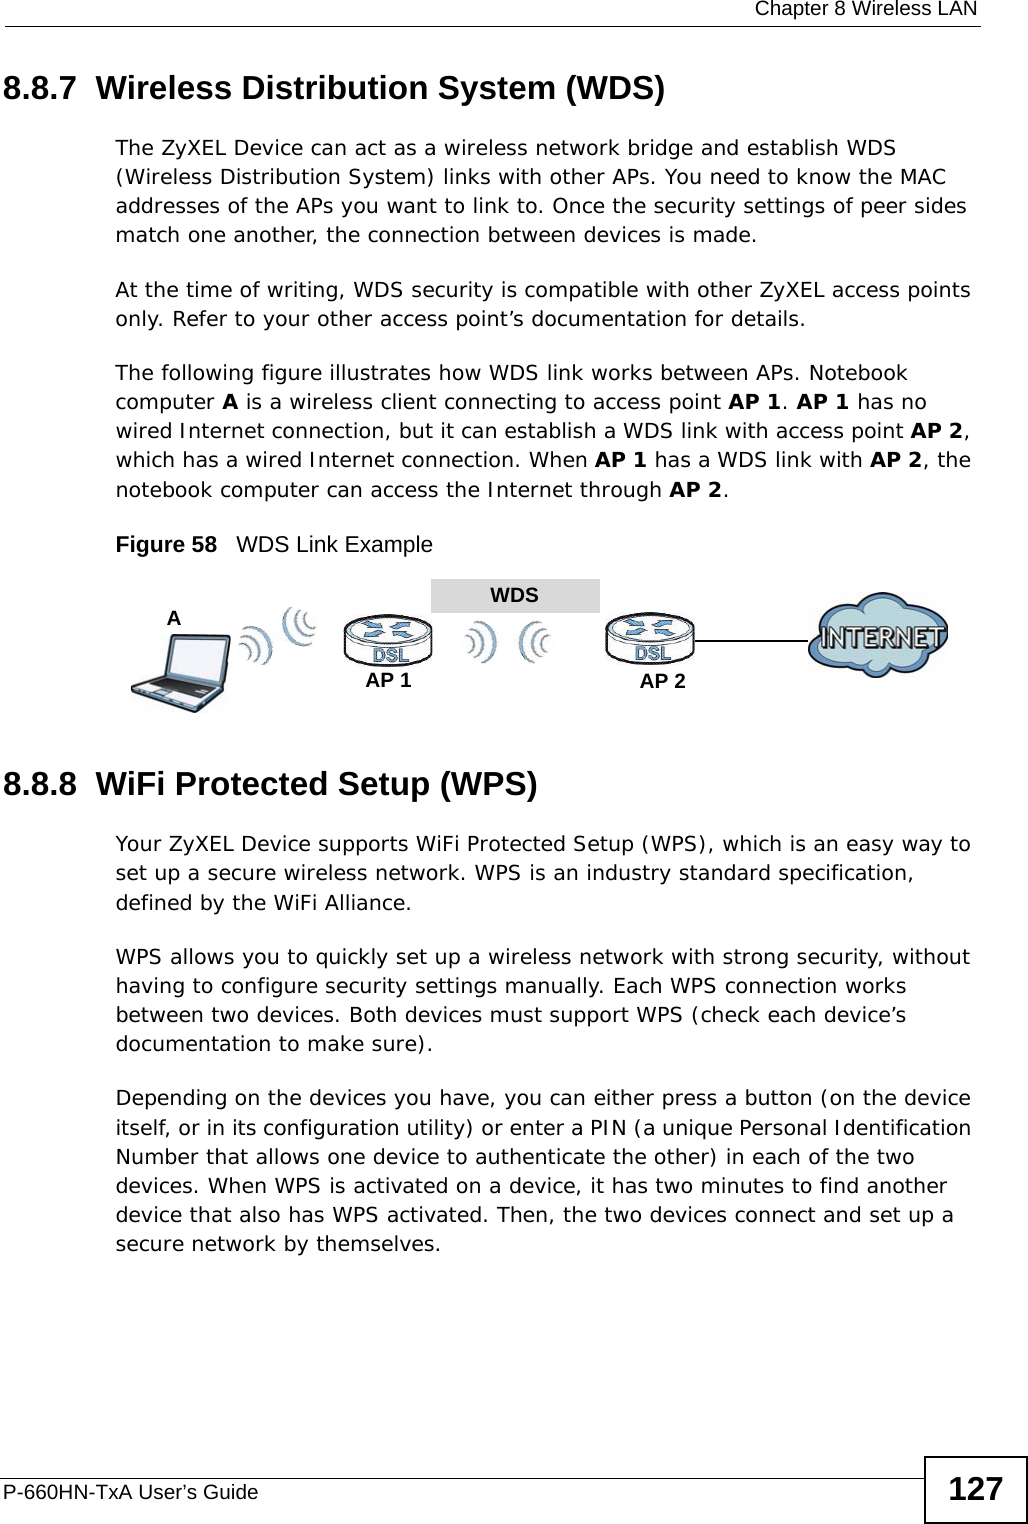  Chapter 8 Wireless LANP-660HN-TxA User’s Guide 1278.8.7  Wireless Distribution System (WDS)The ZyXEL Device can act as a wireless network bridge and establish WDS (Wireless Distribution System) links with other APs. You need to know the MAC addresses of the APs you want to link to. Once the security settings of peer sides match one another, the connection between devices is made.At the time of writing, WDS security is compatible with other ZyXEL access points only. Refer to your other access point’s documentation for details.The following figure illustrates how WDS link works between APs. Notebook computer A is a wireless client connecting to access point AP 1. AP 1 has no wired Internet connection, but it can establish a WDS link with access point AP 2, which has a wired Internet connection. When AP 1 has a WDS link with AP 2, the notebook computer can access the Internet through AP 2.Figure 58   WDS Link Example8.8.8  WiFi Protected Setup (WPS)Your ZyXEL Device supports WiFi Protected Setup (WPS), which is an easy way to set up a secure wireless network. WPS is an industry standard specification, defined by the WiFi Alliance.WPS allows you to quickly set up a wireless network with strong security, without having to configure security settings manually. Each WPS connection works between two devices. Both devices must support WPS (check each device’s documentation to make sure). Depending on the devices you have, you can either press a button (on the device itself, or in its configuration utility) or enter a PIN (a unique Personal Identification Number that allows one device to authenticate the other) in each of the two devices. When WPS is activated on a device, it has two minutes to find another device that also has WPS activated. Then, the two devices connect and set up a secure network by themselves.WDSAP 2AP 1A